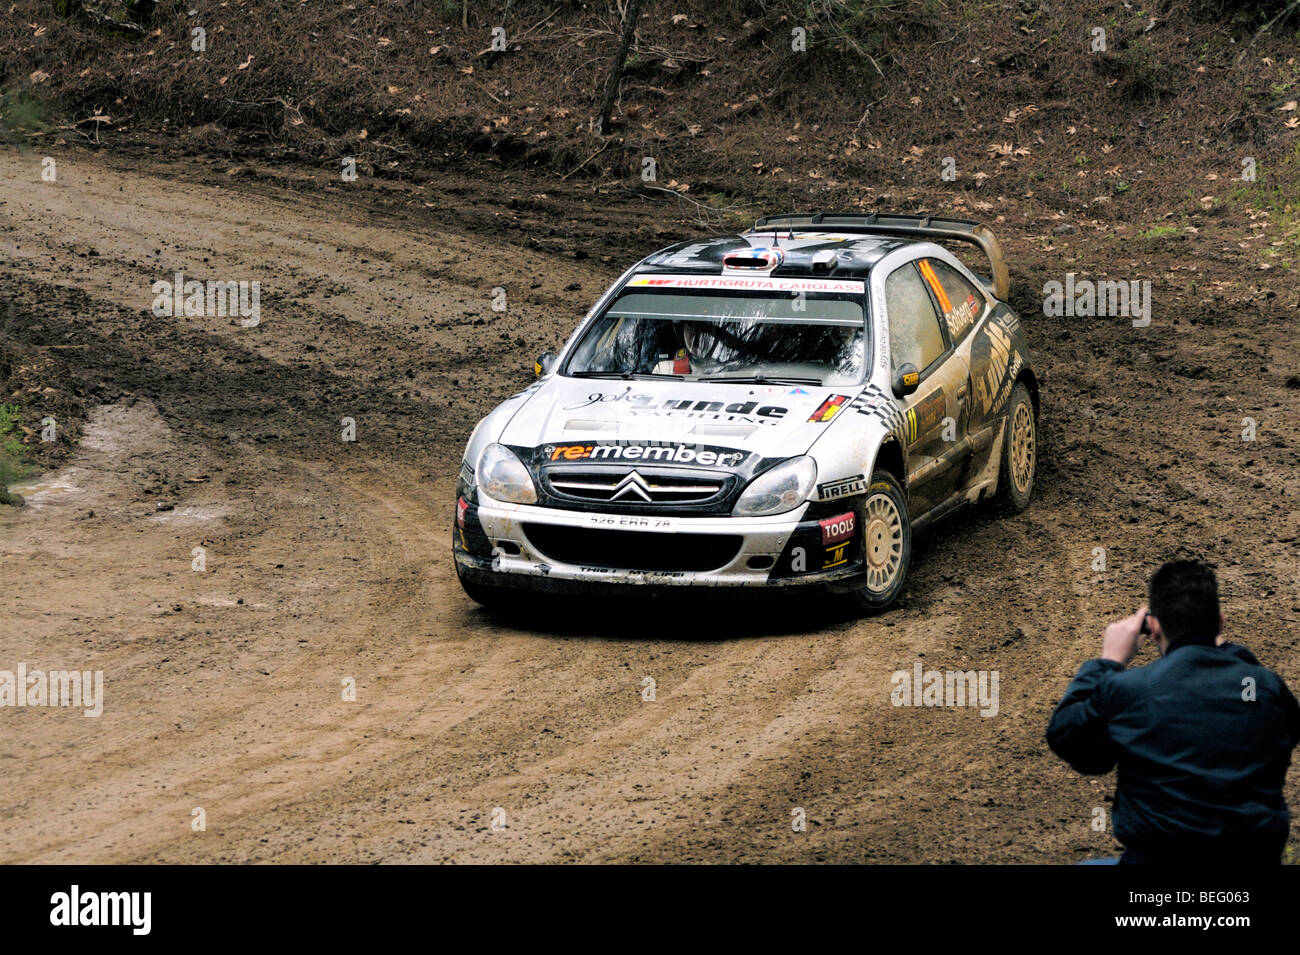 2009 Cyprus rally in Troodos mountains. Stock Photo